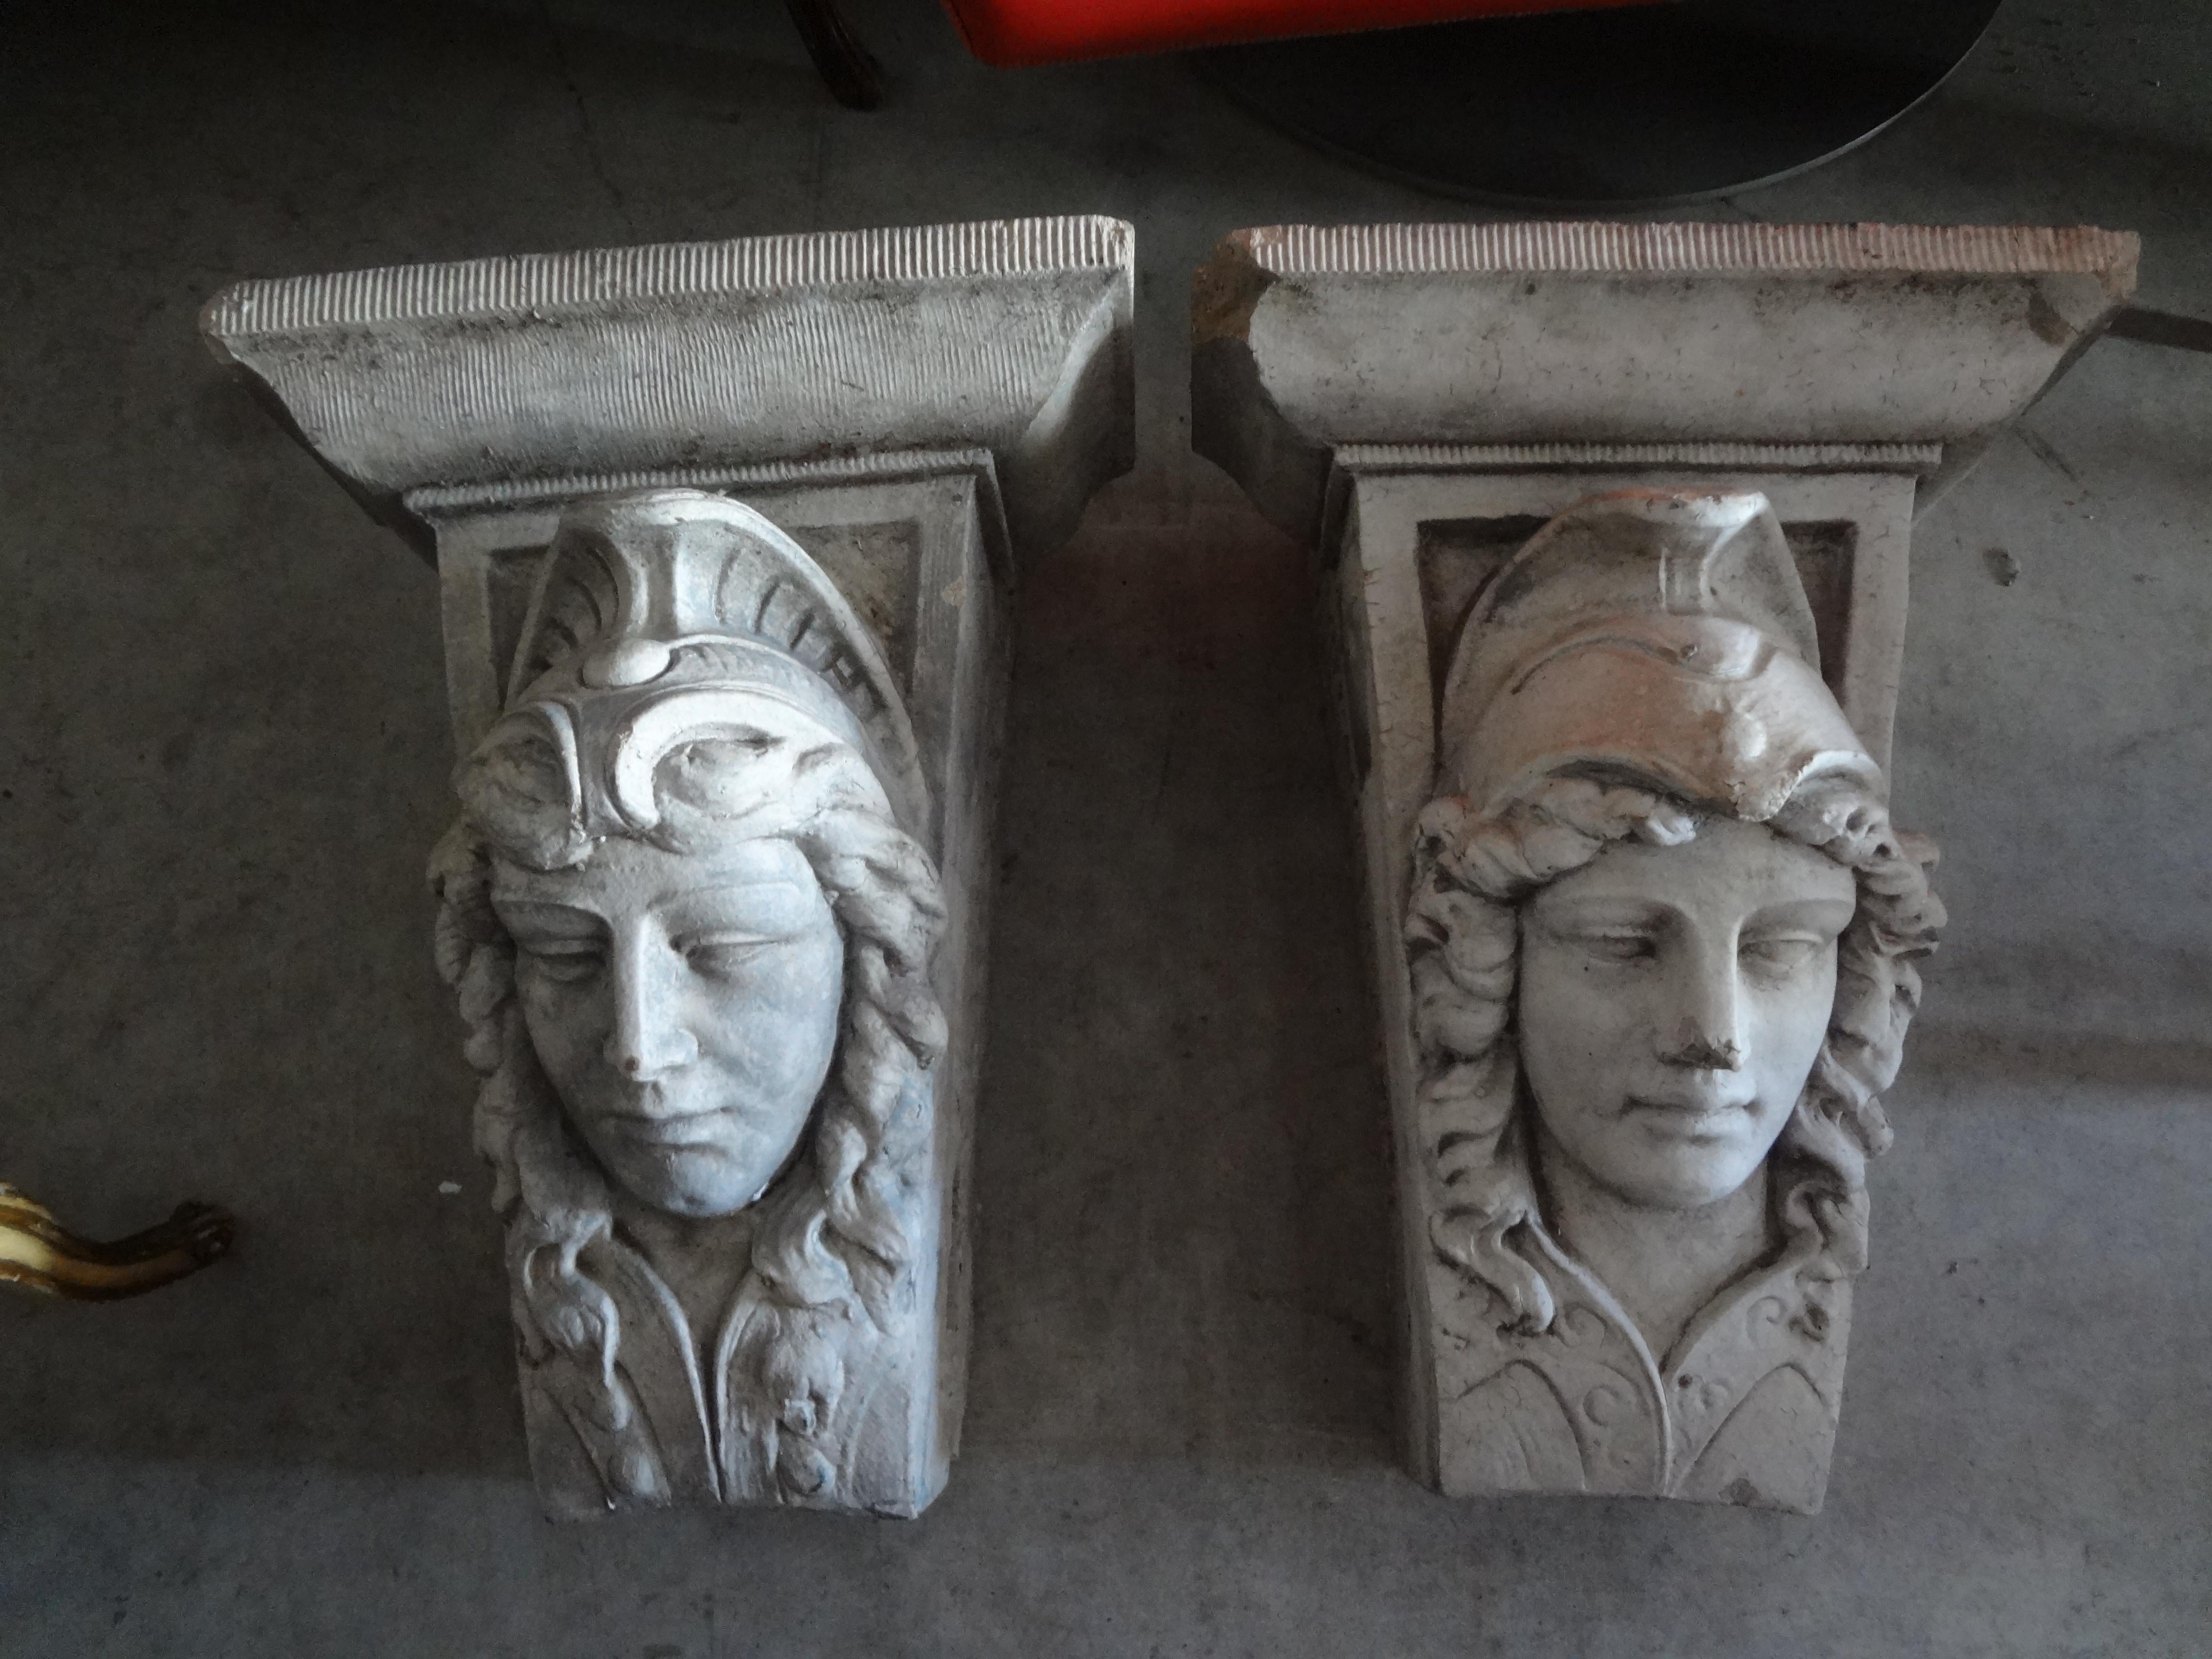 Great pair of early 20th century classical Roman style cast cement architectural figural wall corbels. This well cast pair of corbels, wall brackets or wall-mounted sculptures would work equally well indoors or in a garden.
Dimensions:
20